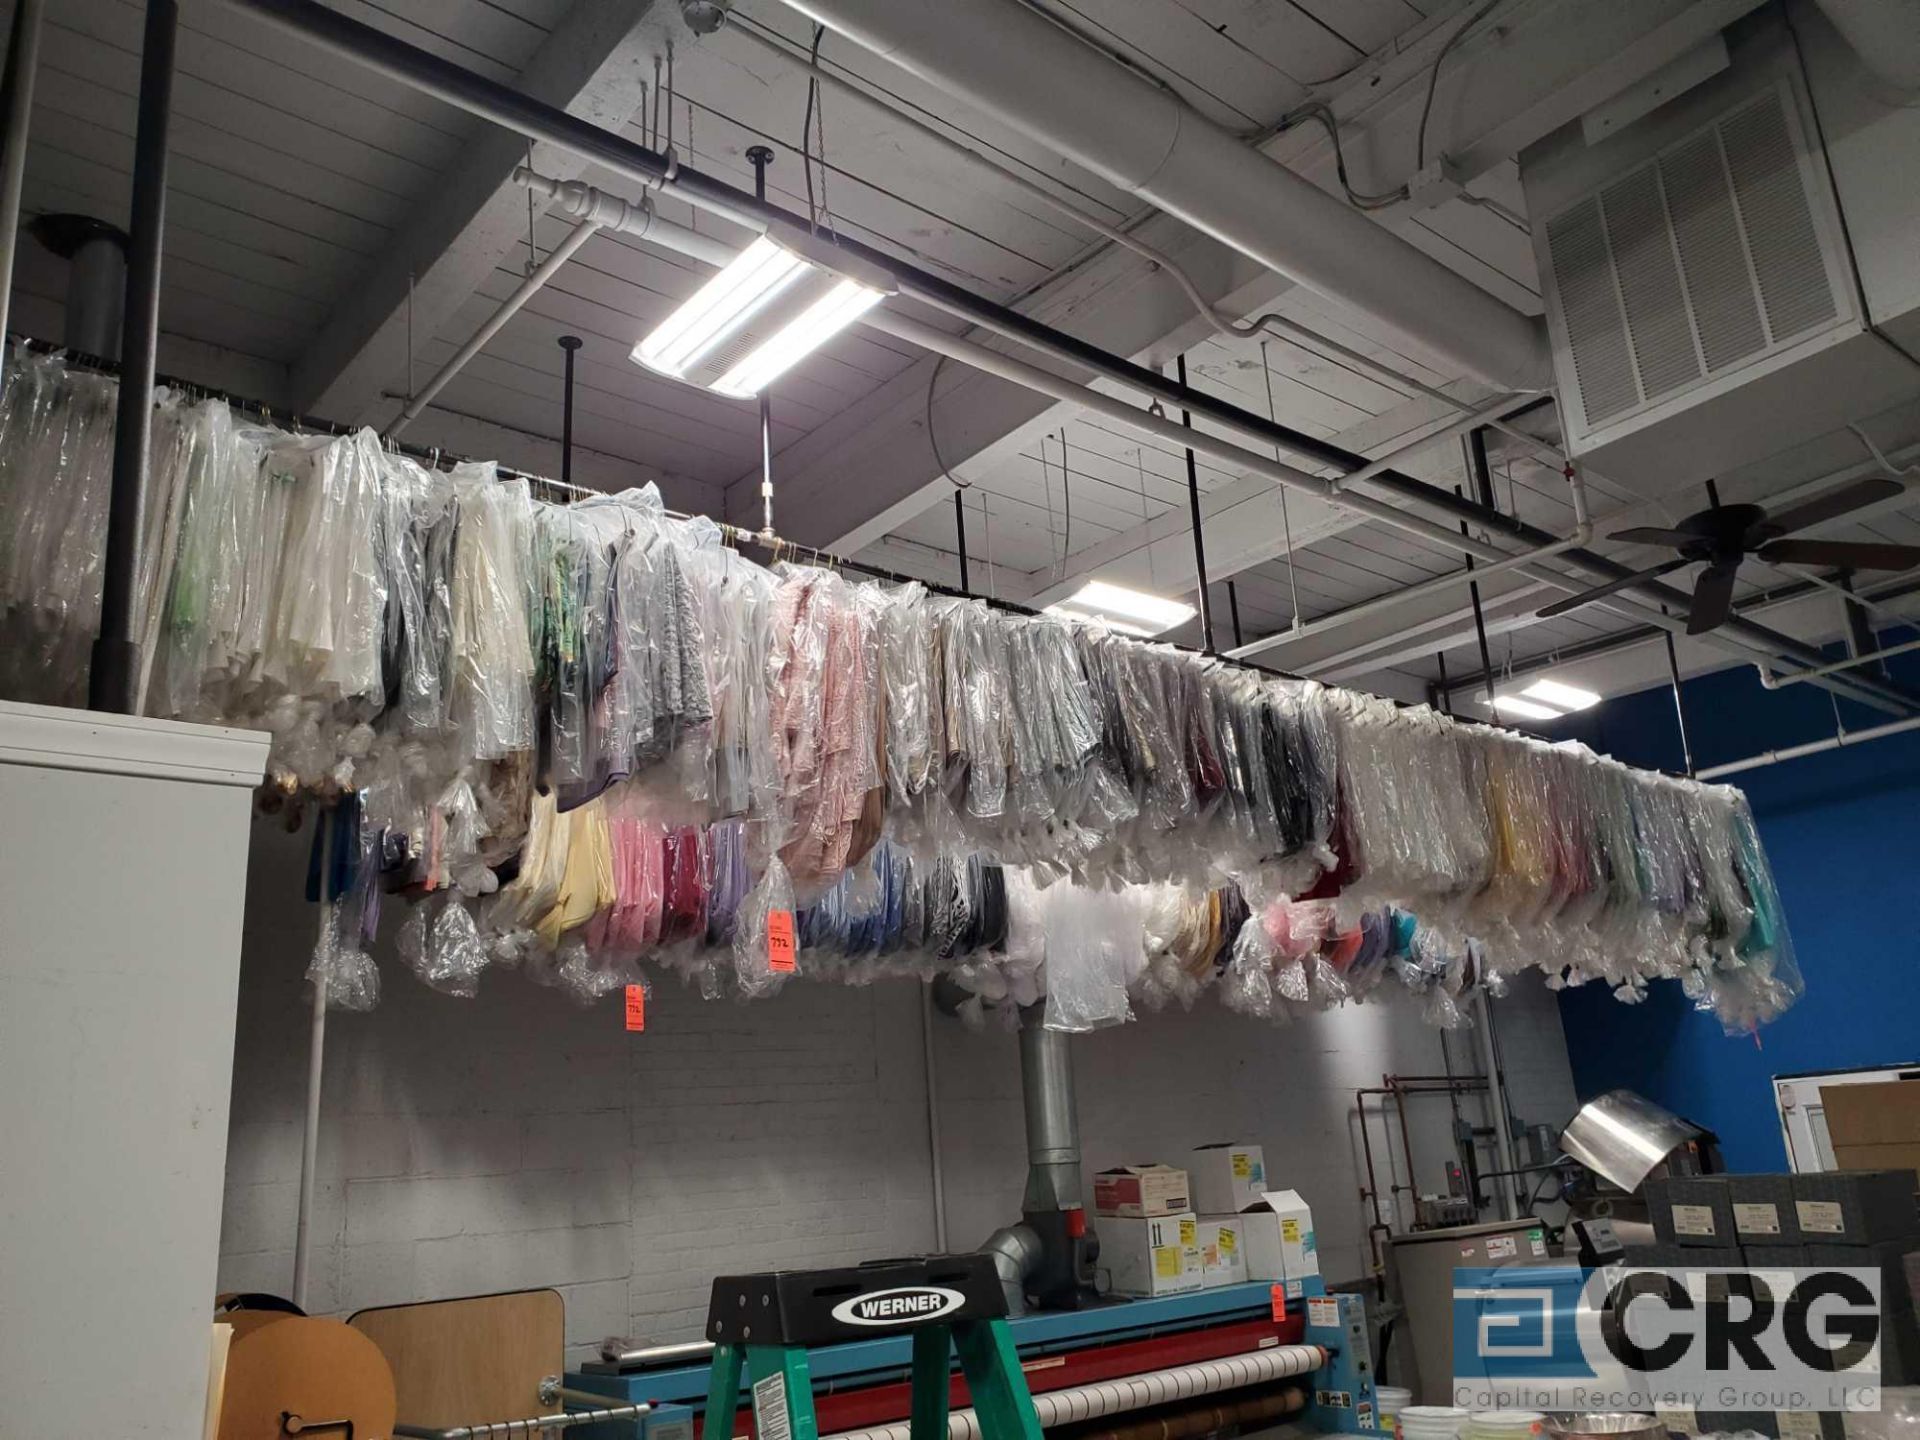 Lot of approx (3800) asst sashes, overlays, and runners (hanging from ceiling style rack)